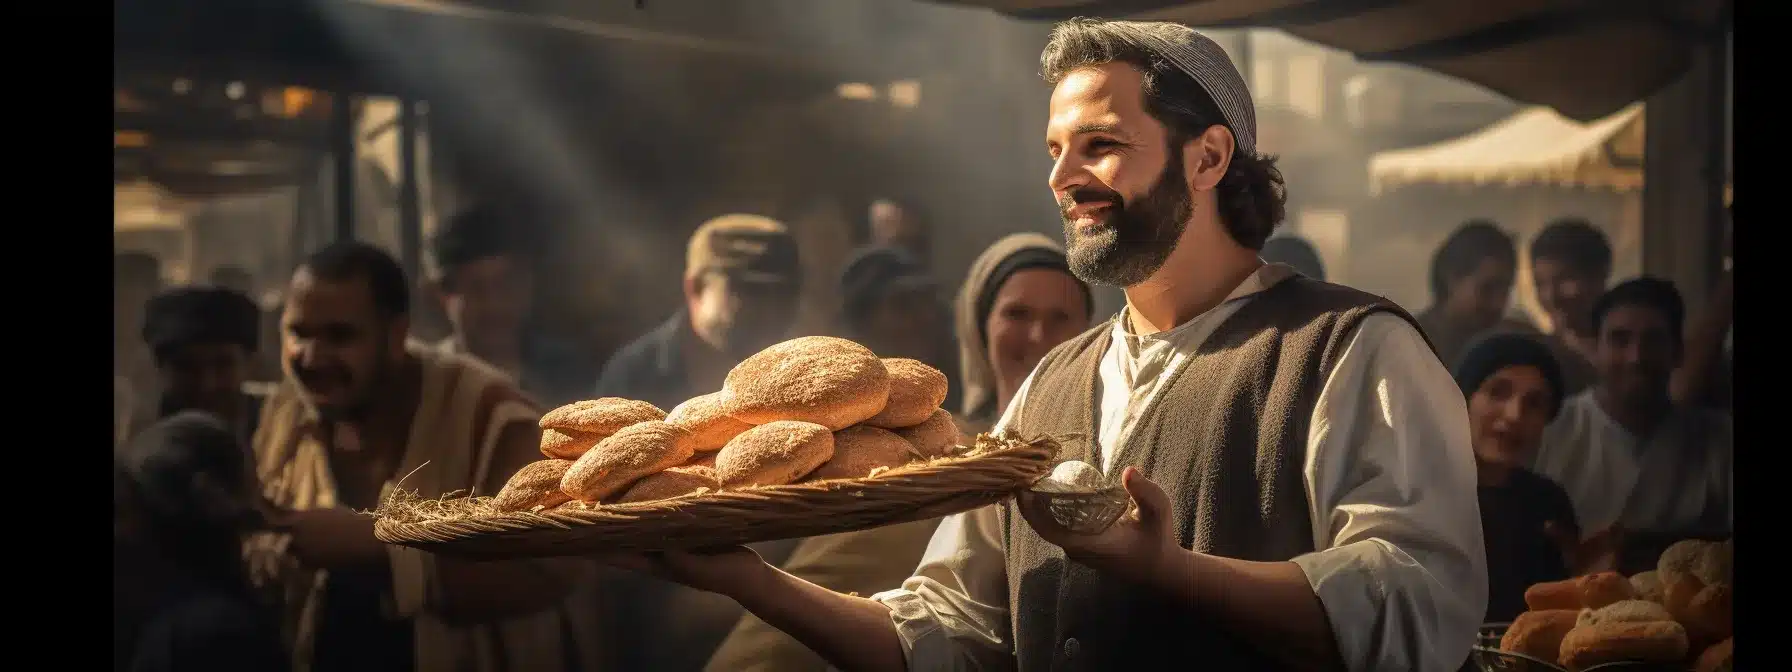 A Chef Serving A Hot Loaf Of Bread With Garnishments To A Bustling Crowd At A Bazaar.